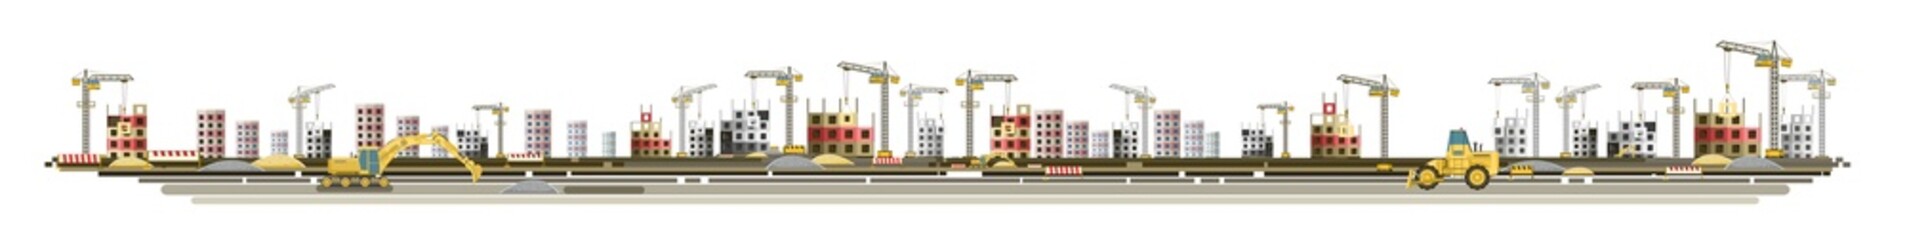 Construction of new microdistrict of city. Cranes and Tractors. Modern technologies and equipment. Horizontal. Isolated on white background illustration vector